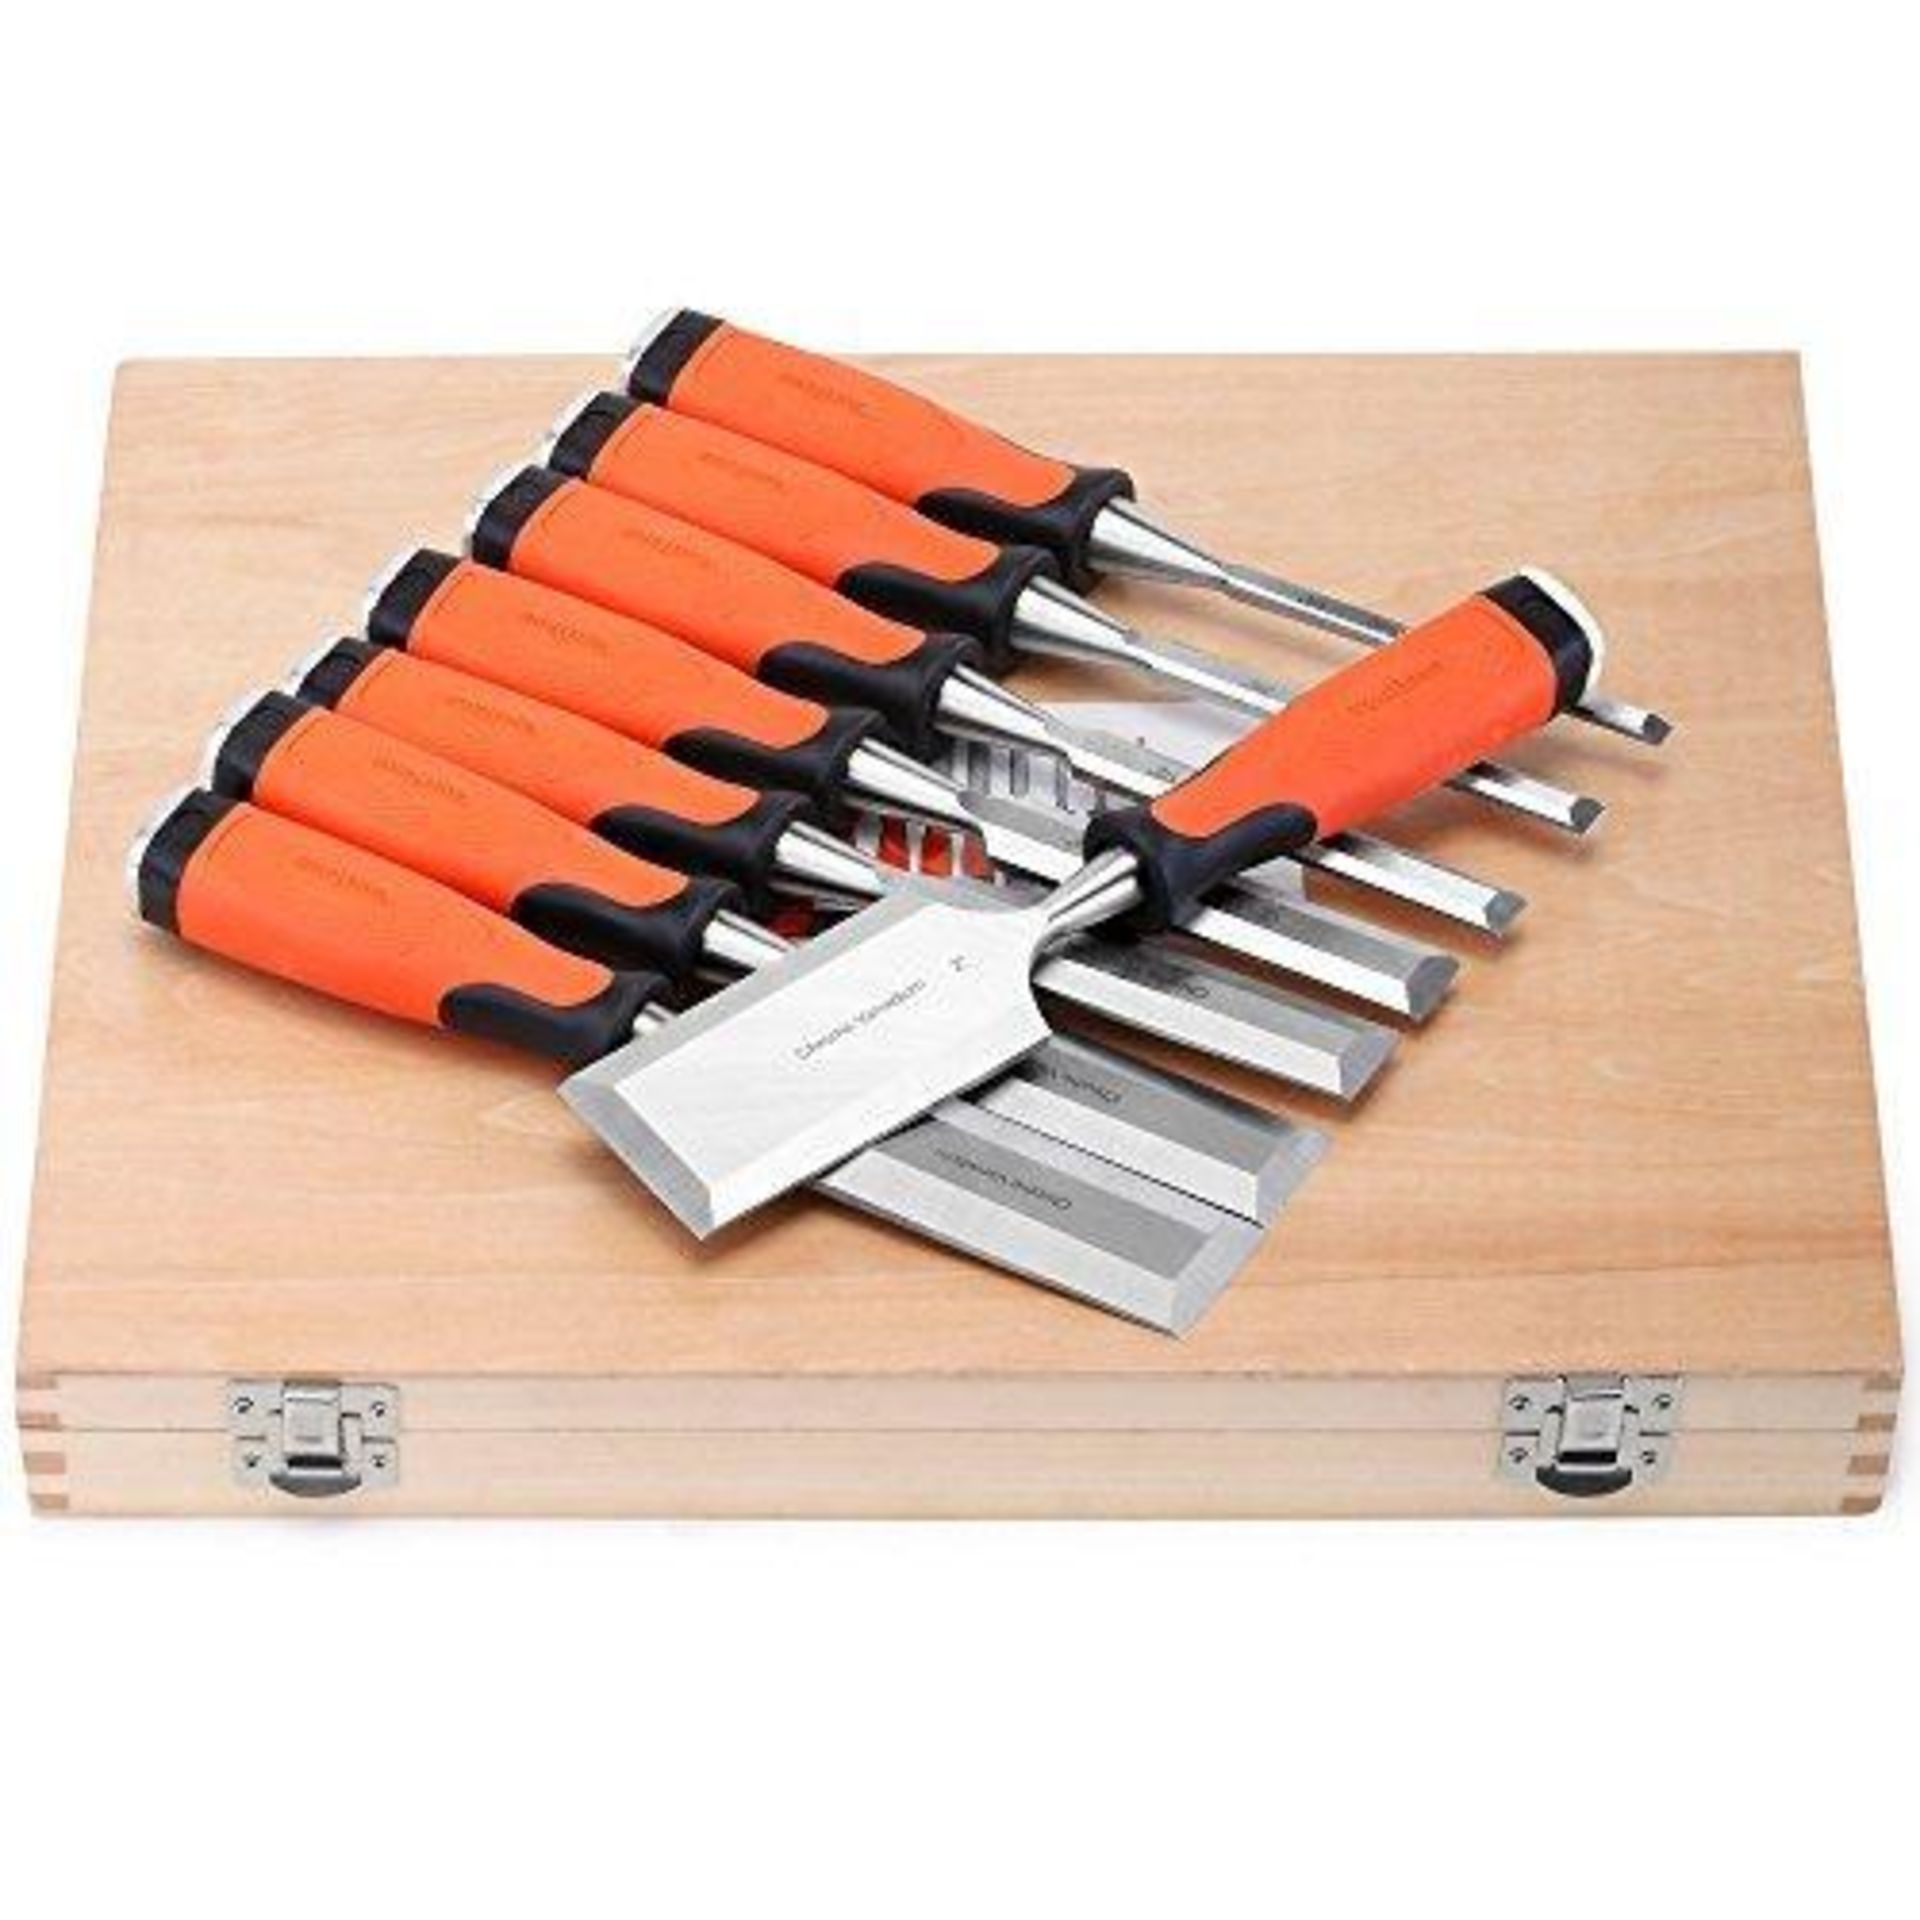 10pc Wood Chisel Set - ER7. Luxury 10pc Wood Chisel SetThis Luxury Chisel Set is just the job for - Image 3 of 5